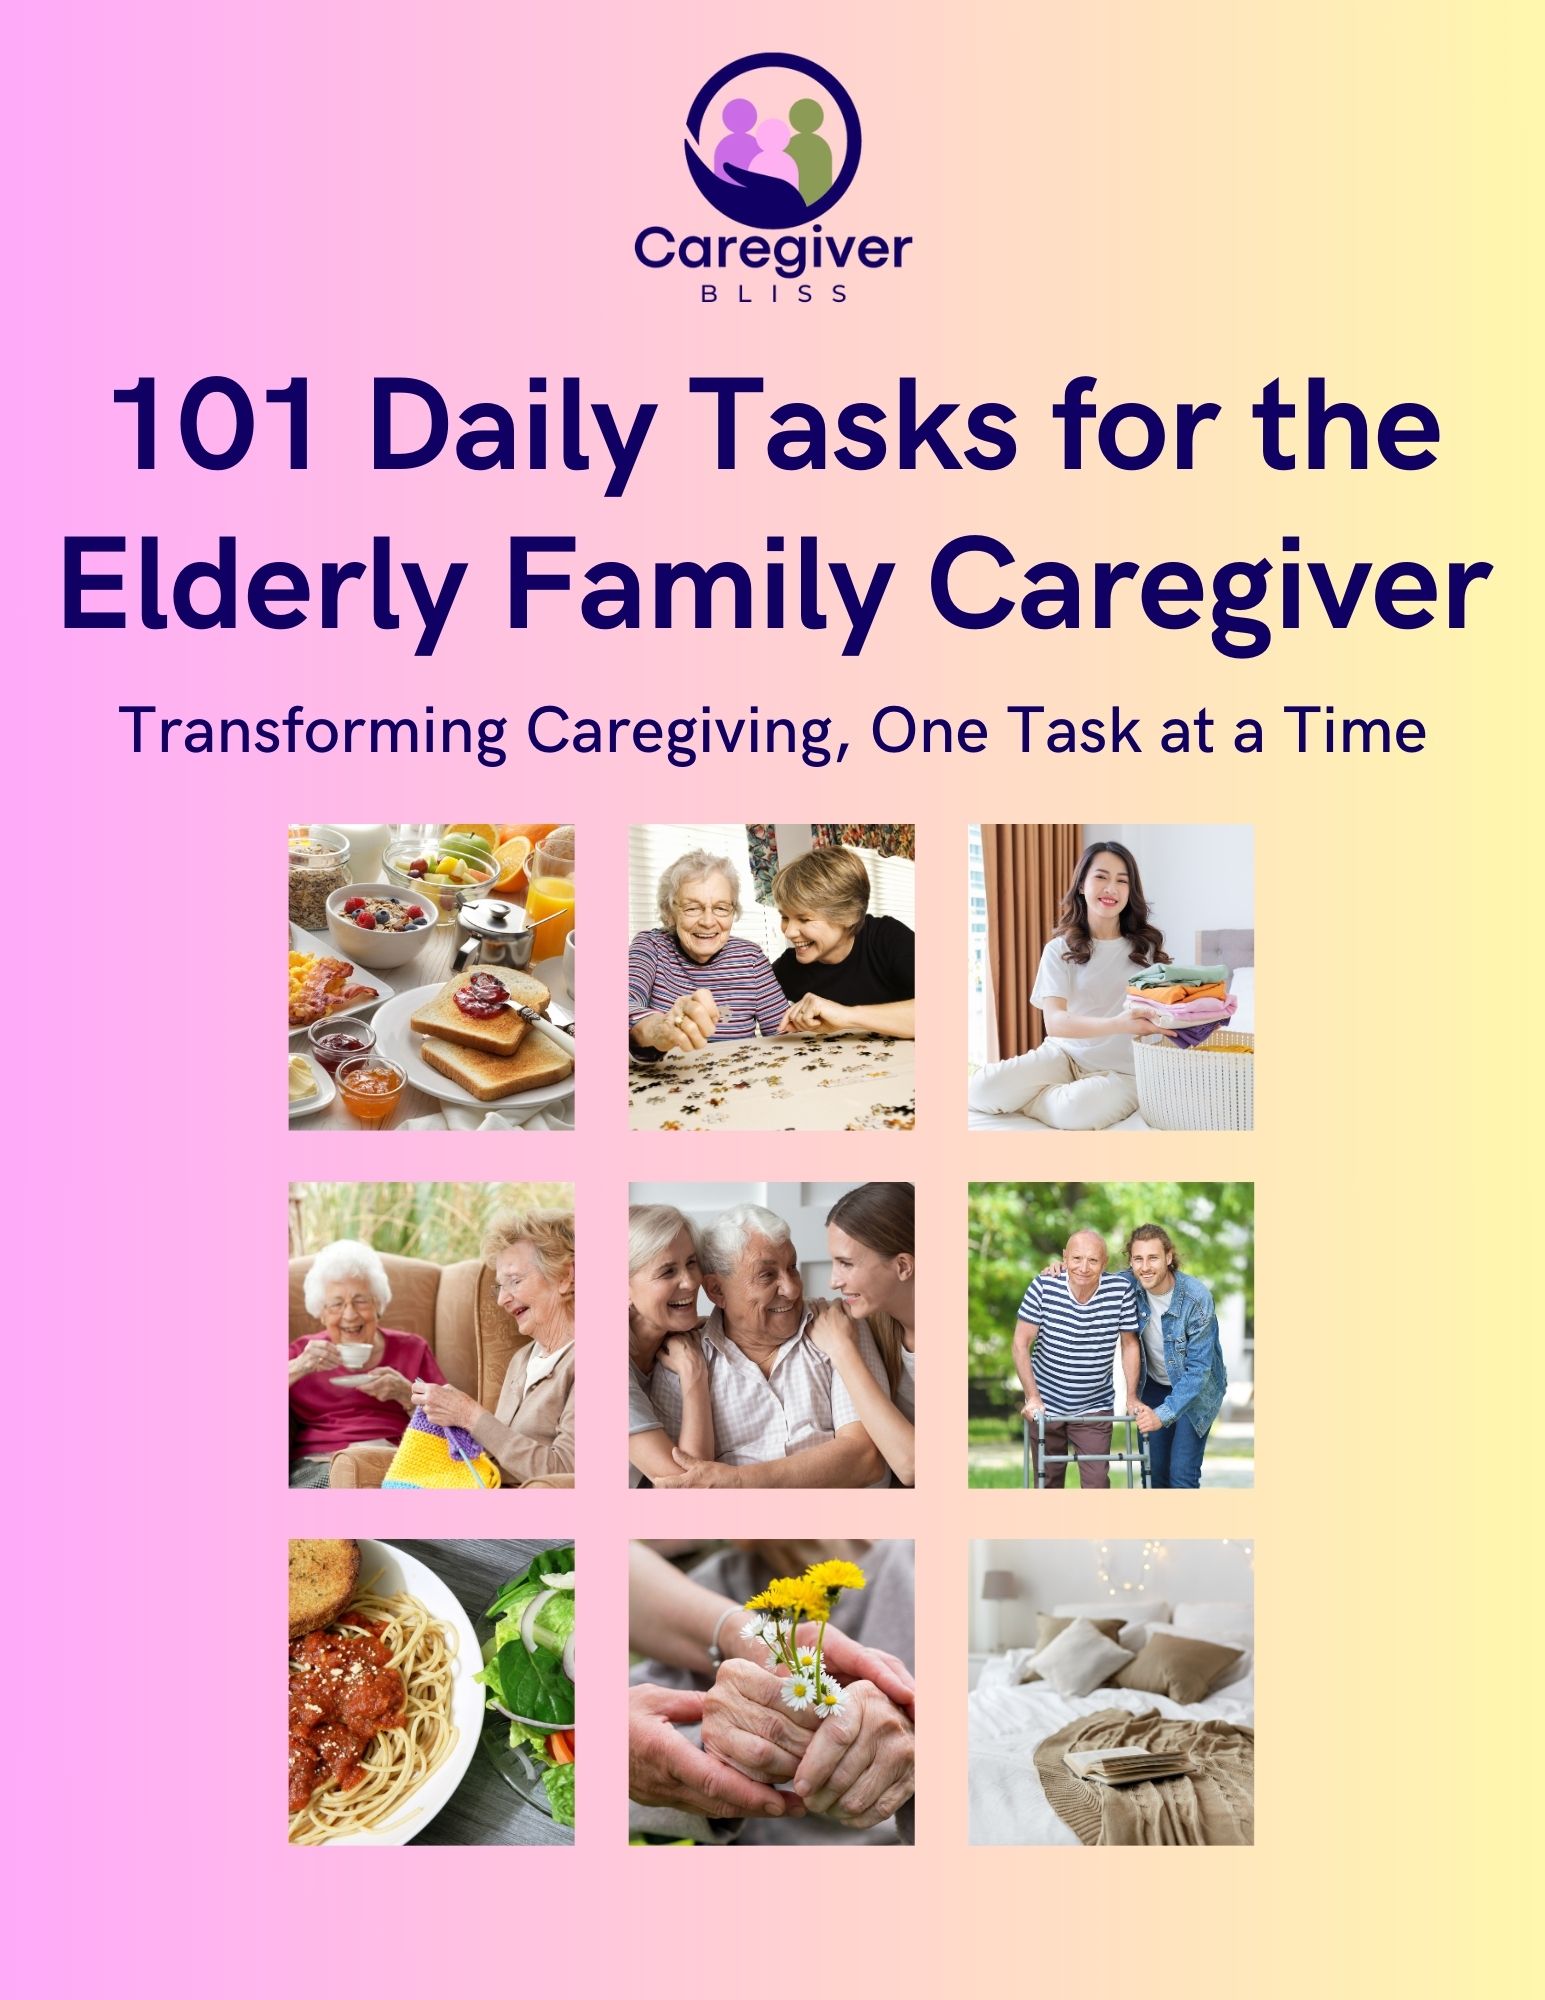 101 Daily Tasks for the Elderly Family Caregiver: Transforming Caregiving, One Task at a Time | Caregiver Bliss